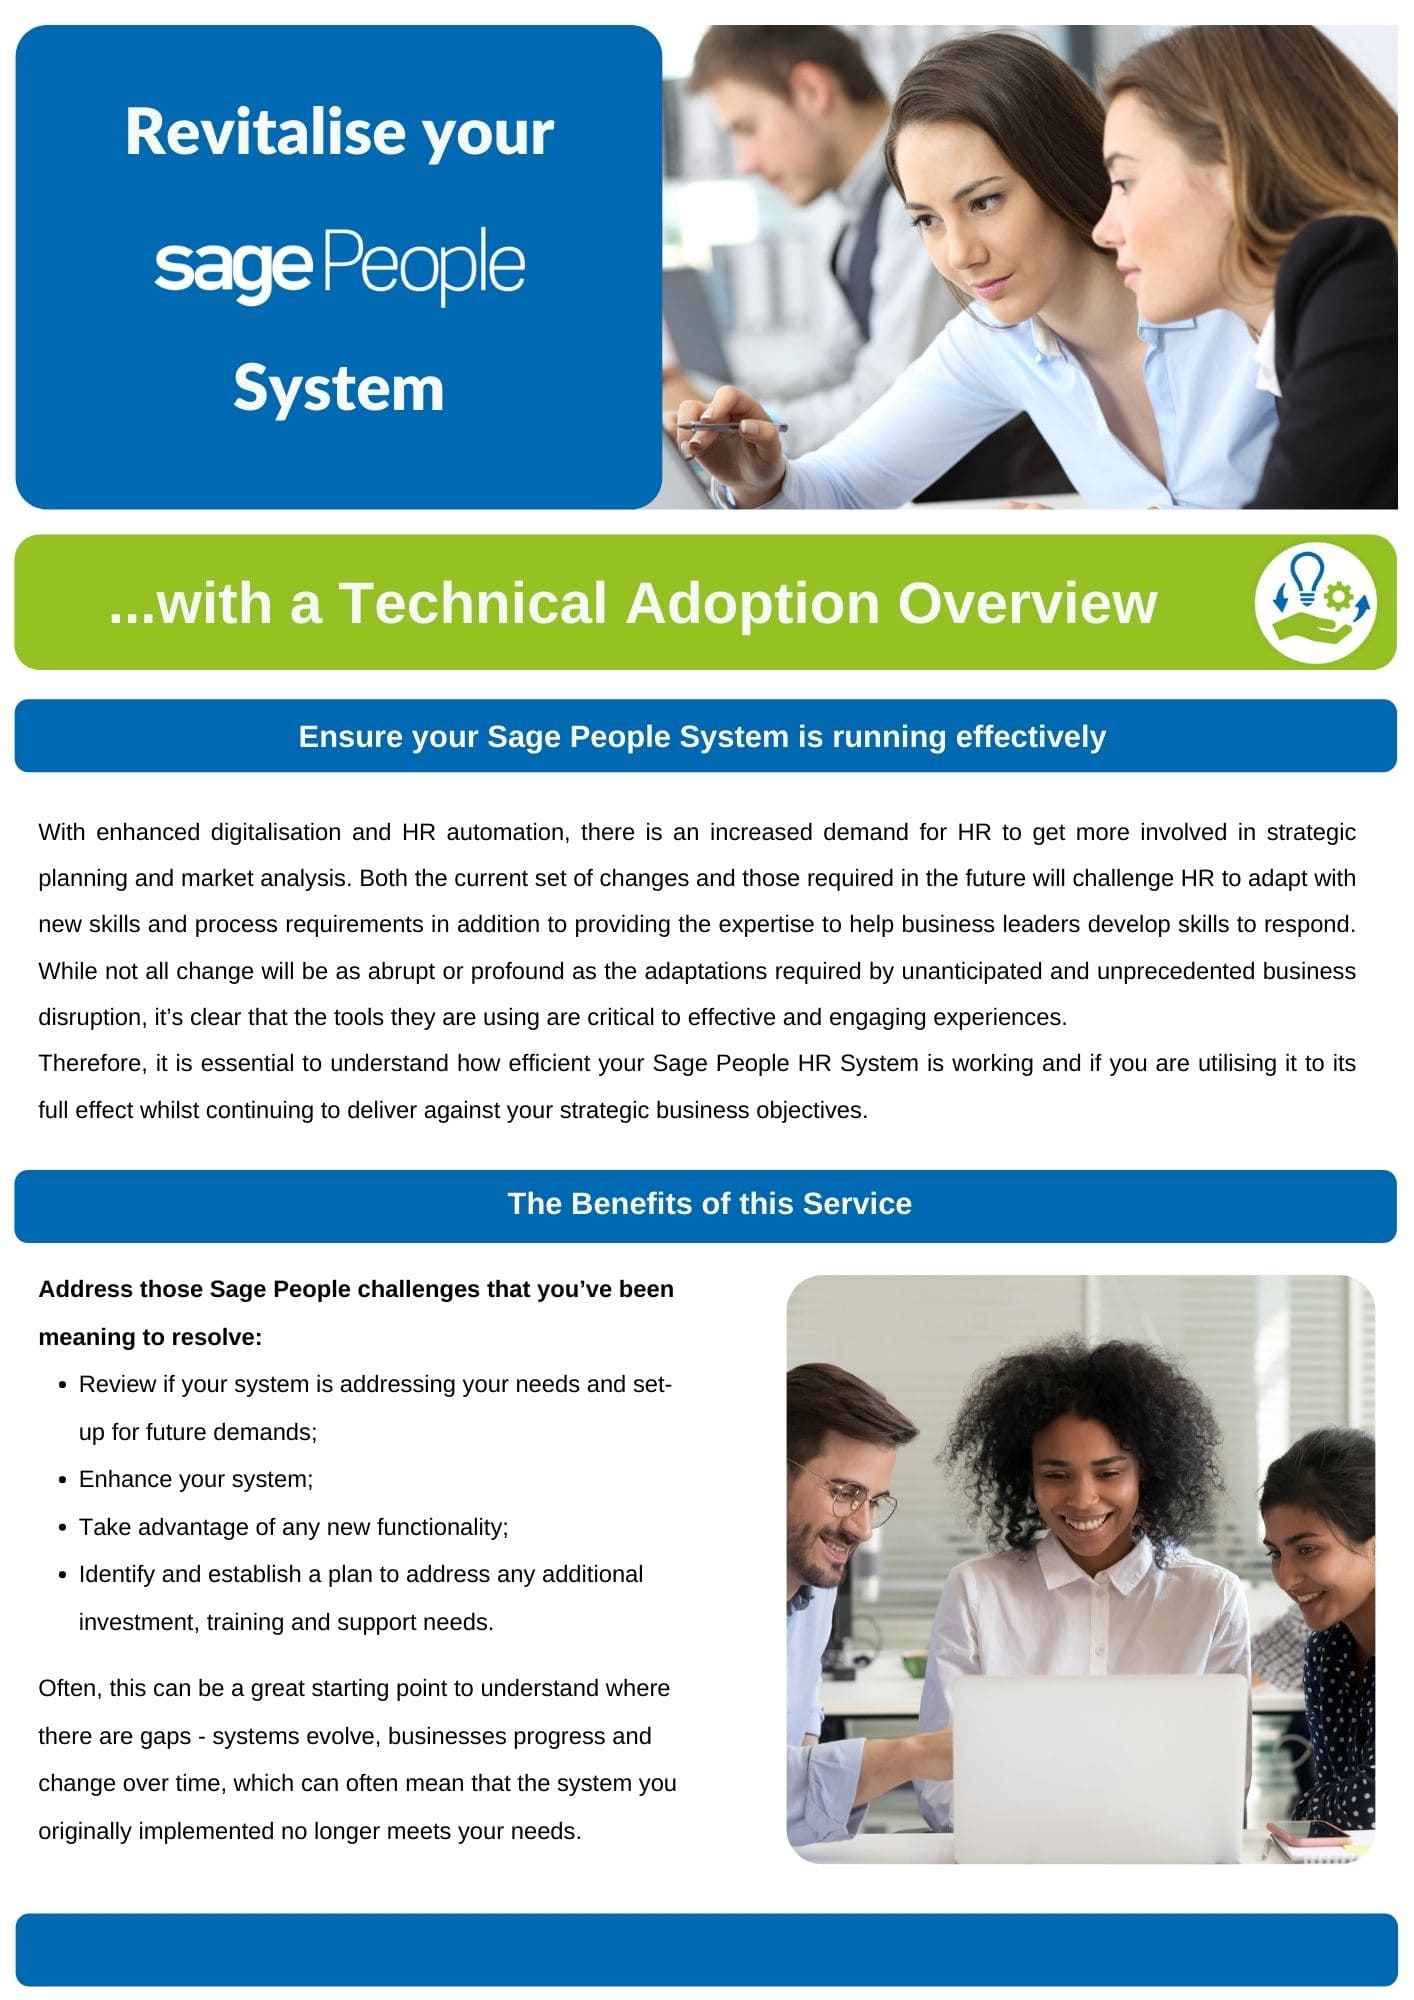 Revitalize your Sage People System with a technical adoption overview. Learn more.